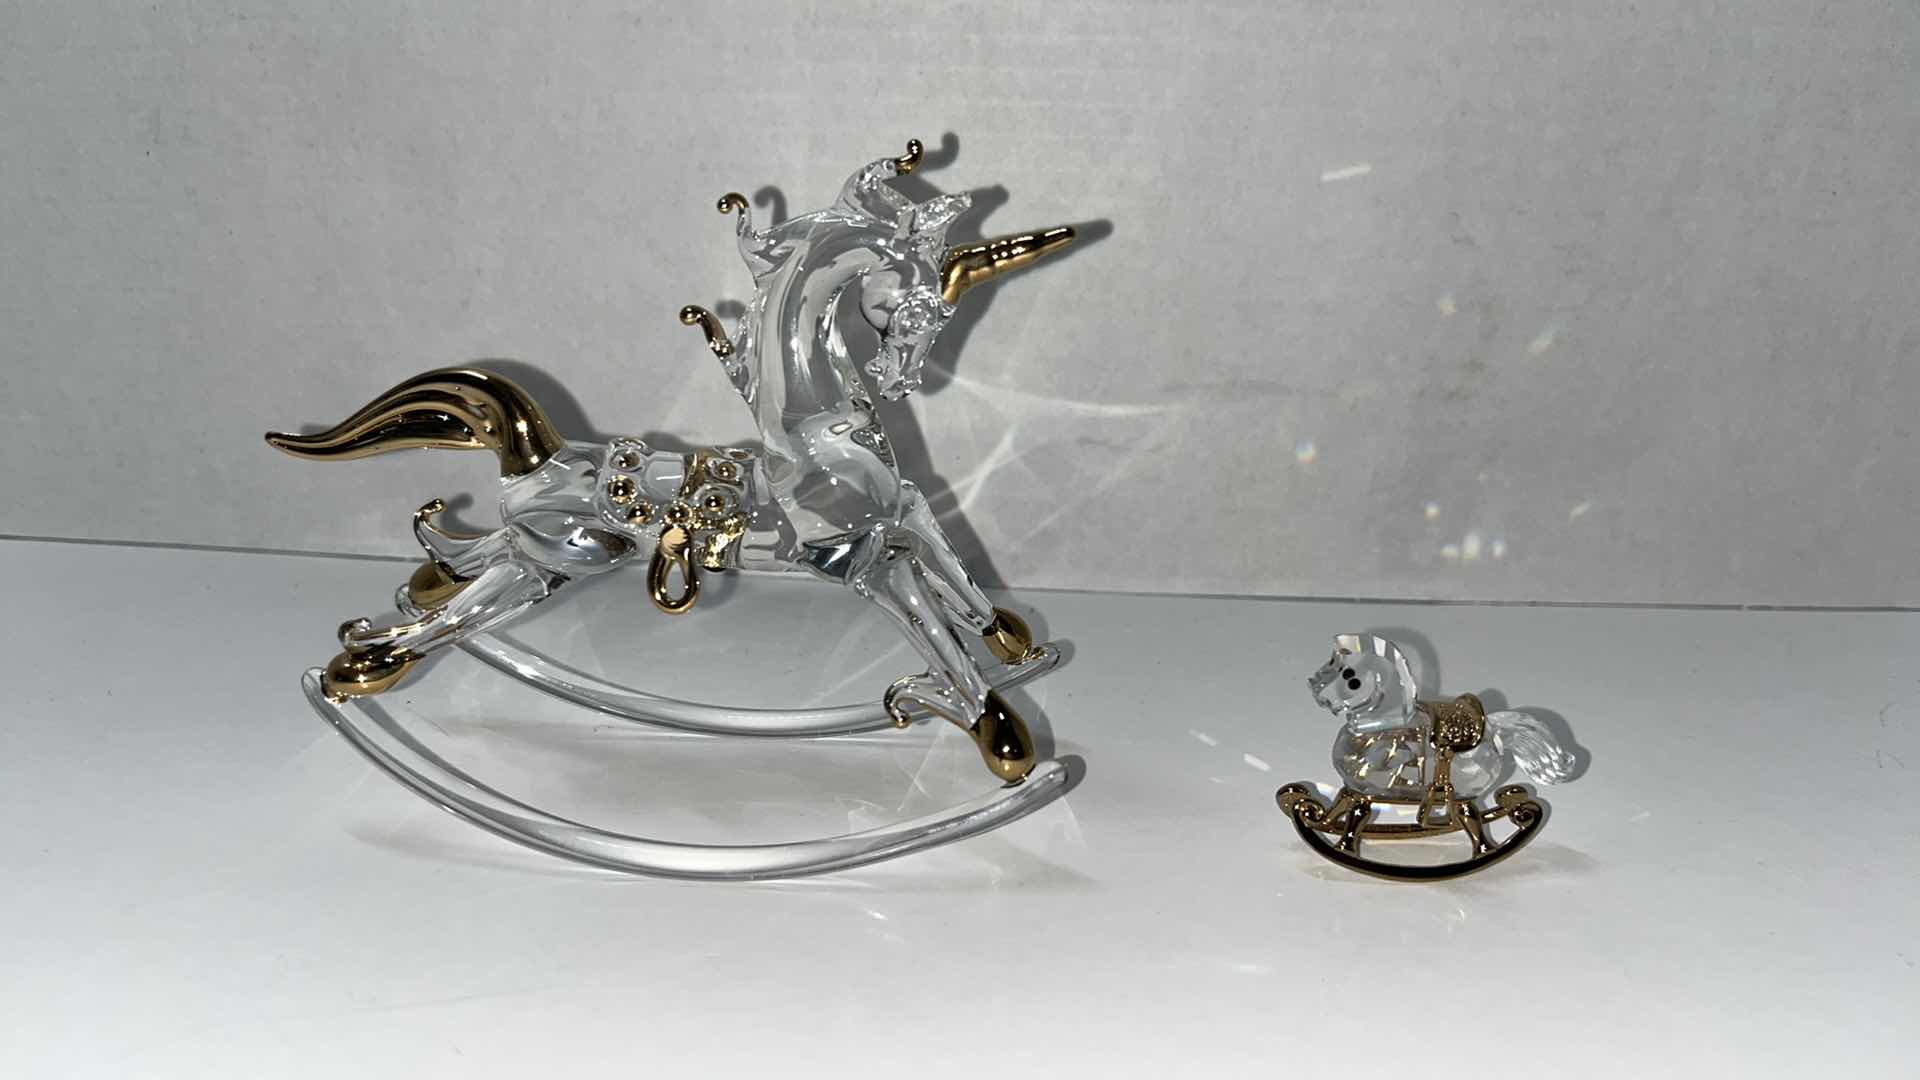 Photo 1 of HAND BLOWN CLEAR GLASS ROCKING UNICORN W GOLD ACCENTS 4.75” X 2” H4”W CRYSTAL ROCKING HORSE W GOLD ACCENTS (2)